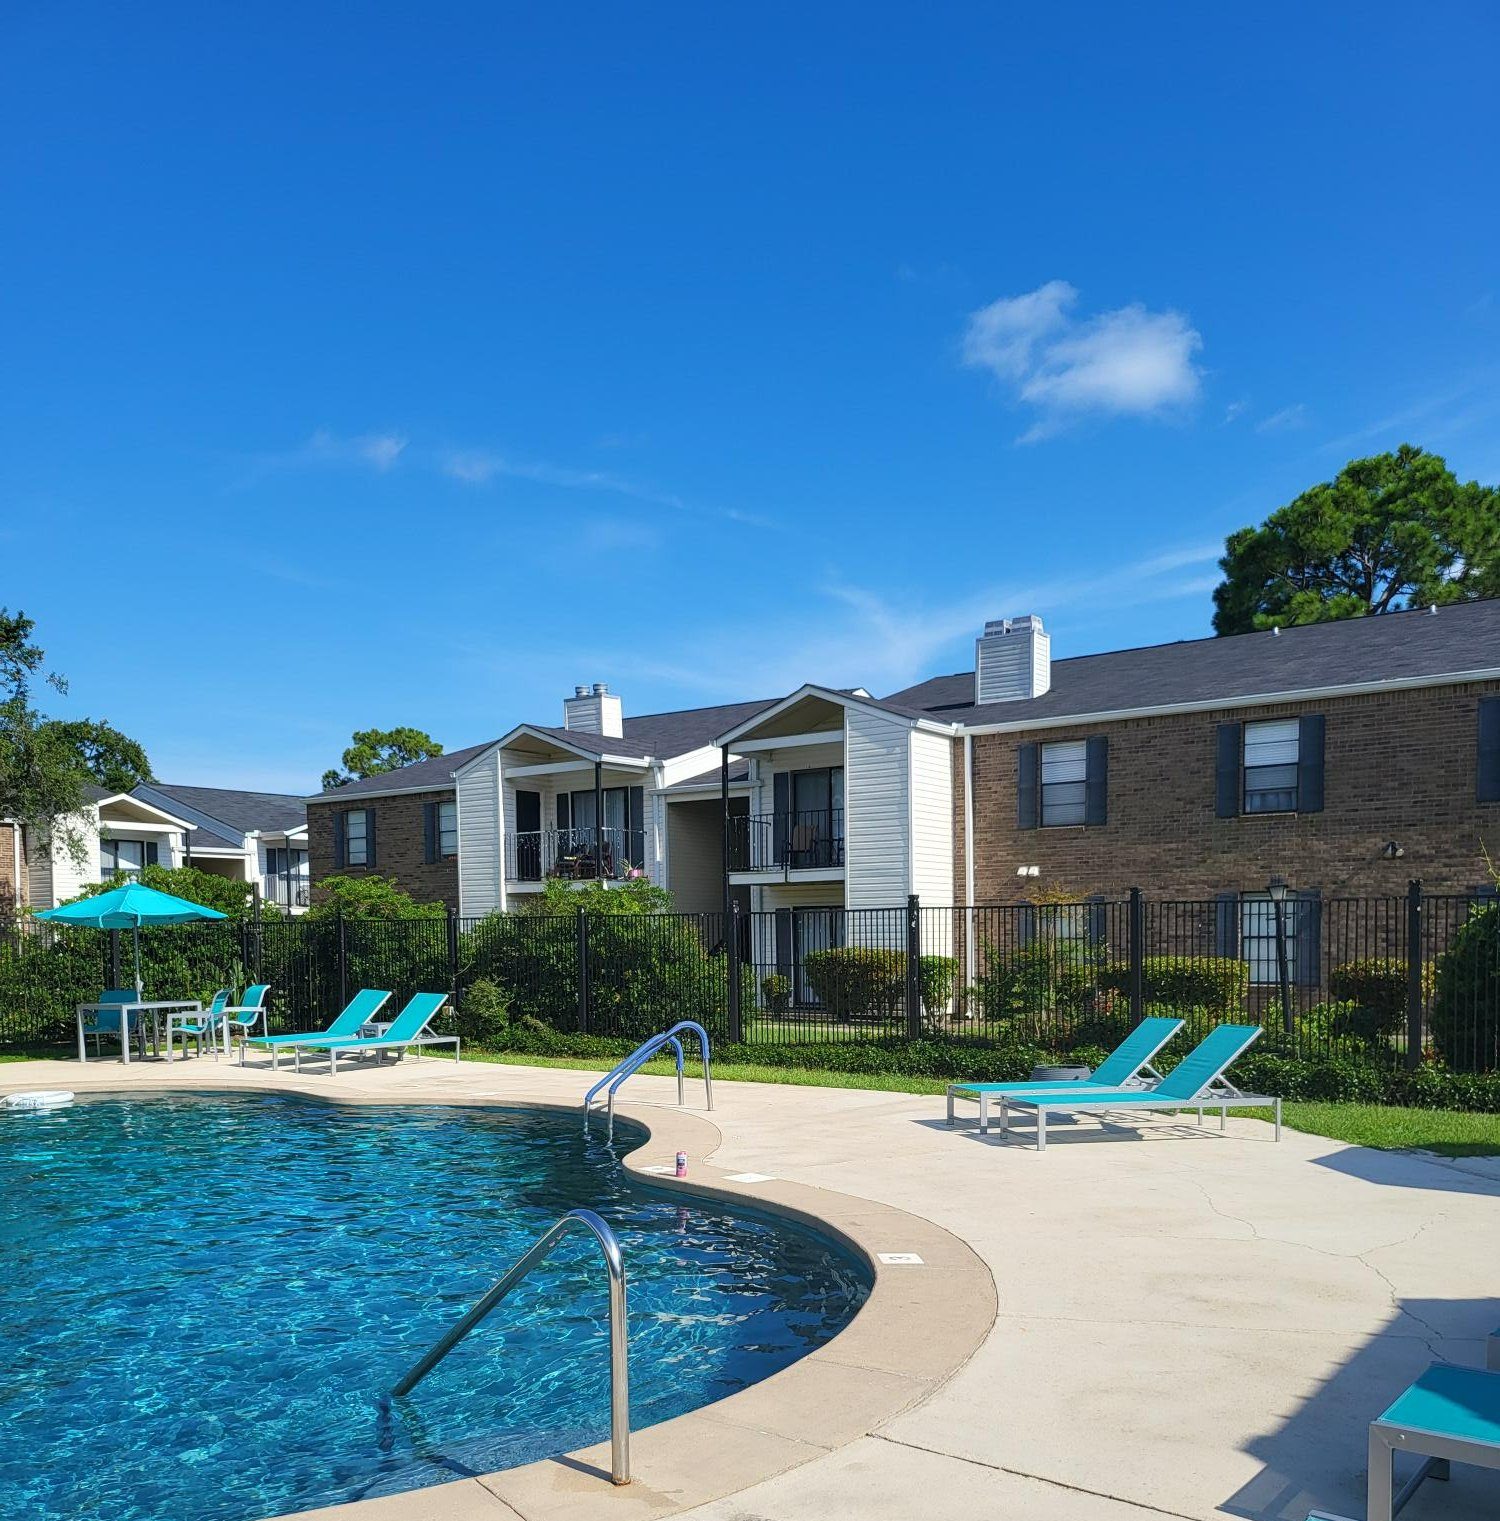 Edgewater Pointe Apartments Exterior Swimming Pool View by Corinthian Asset Management